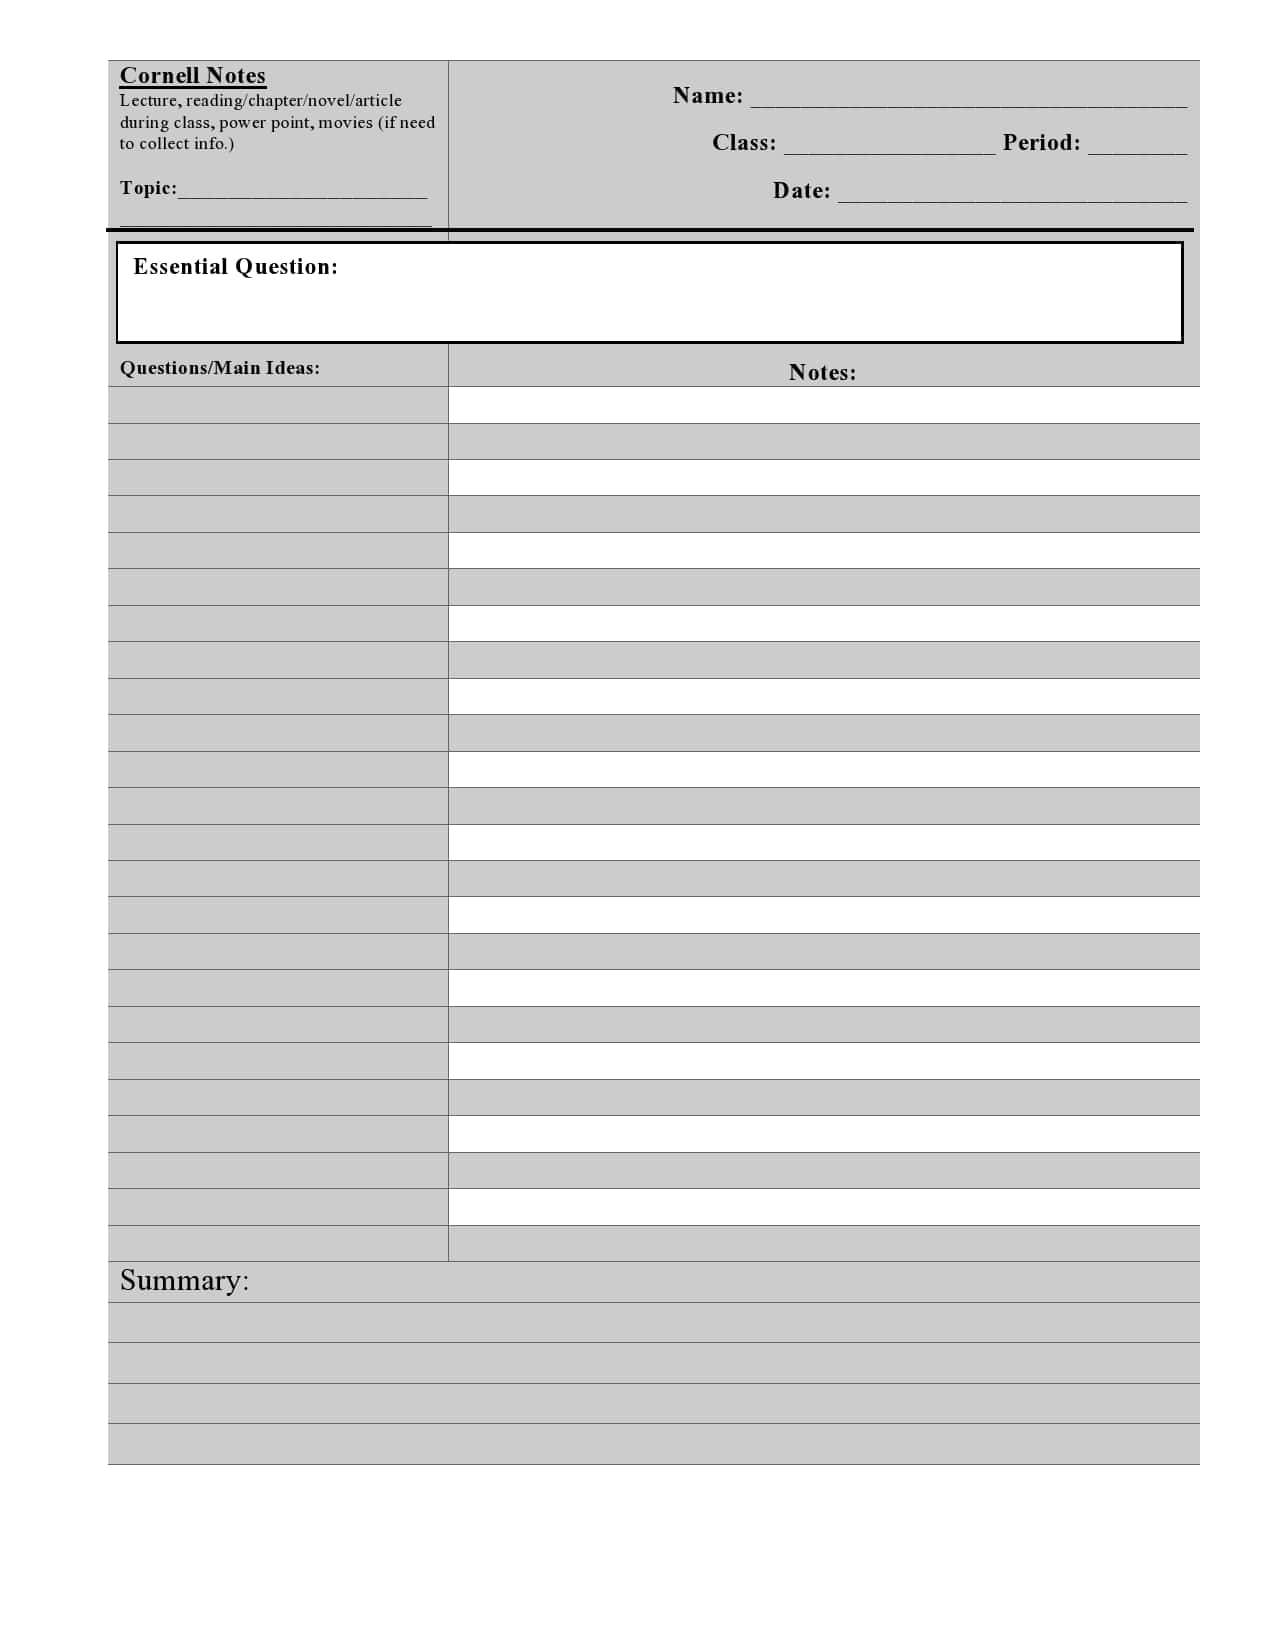 23 Printable Cornell Notes Templates [Free] - TemplateArchive With Regard To Note Taking Template Word